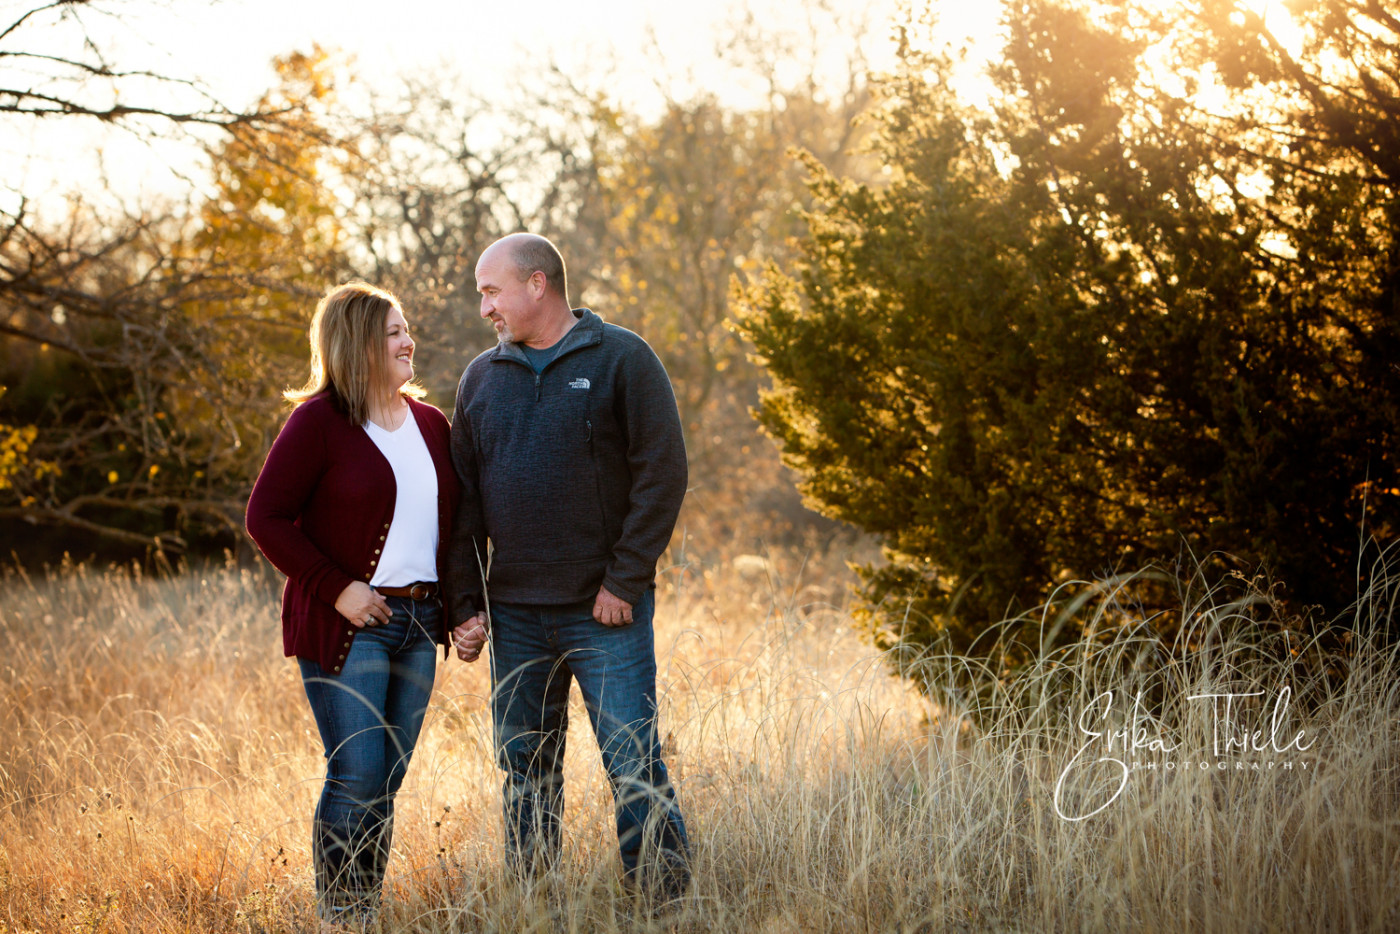 The Bahe Family  |  An Outdoor Family Session 